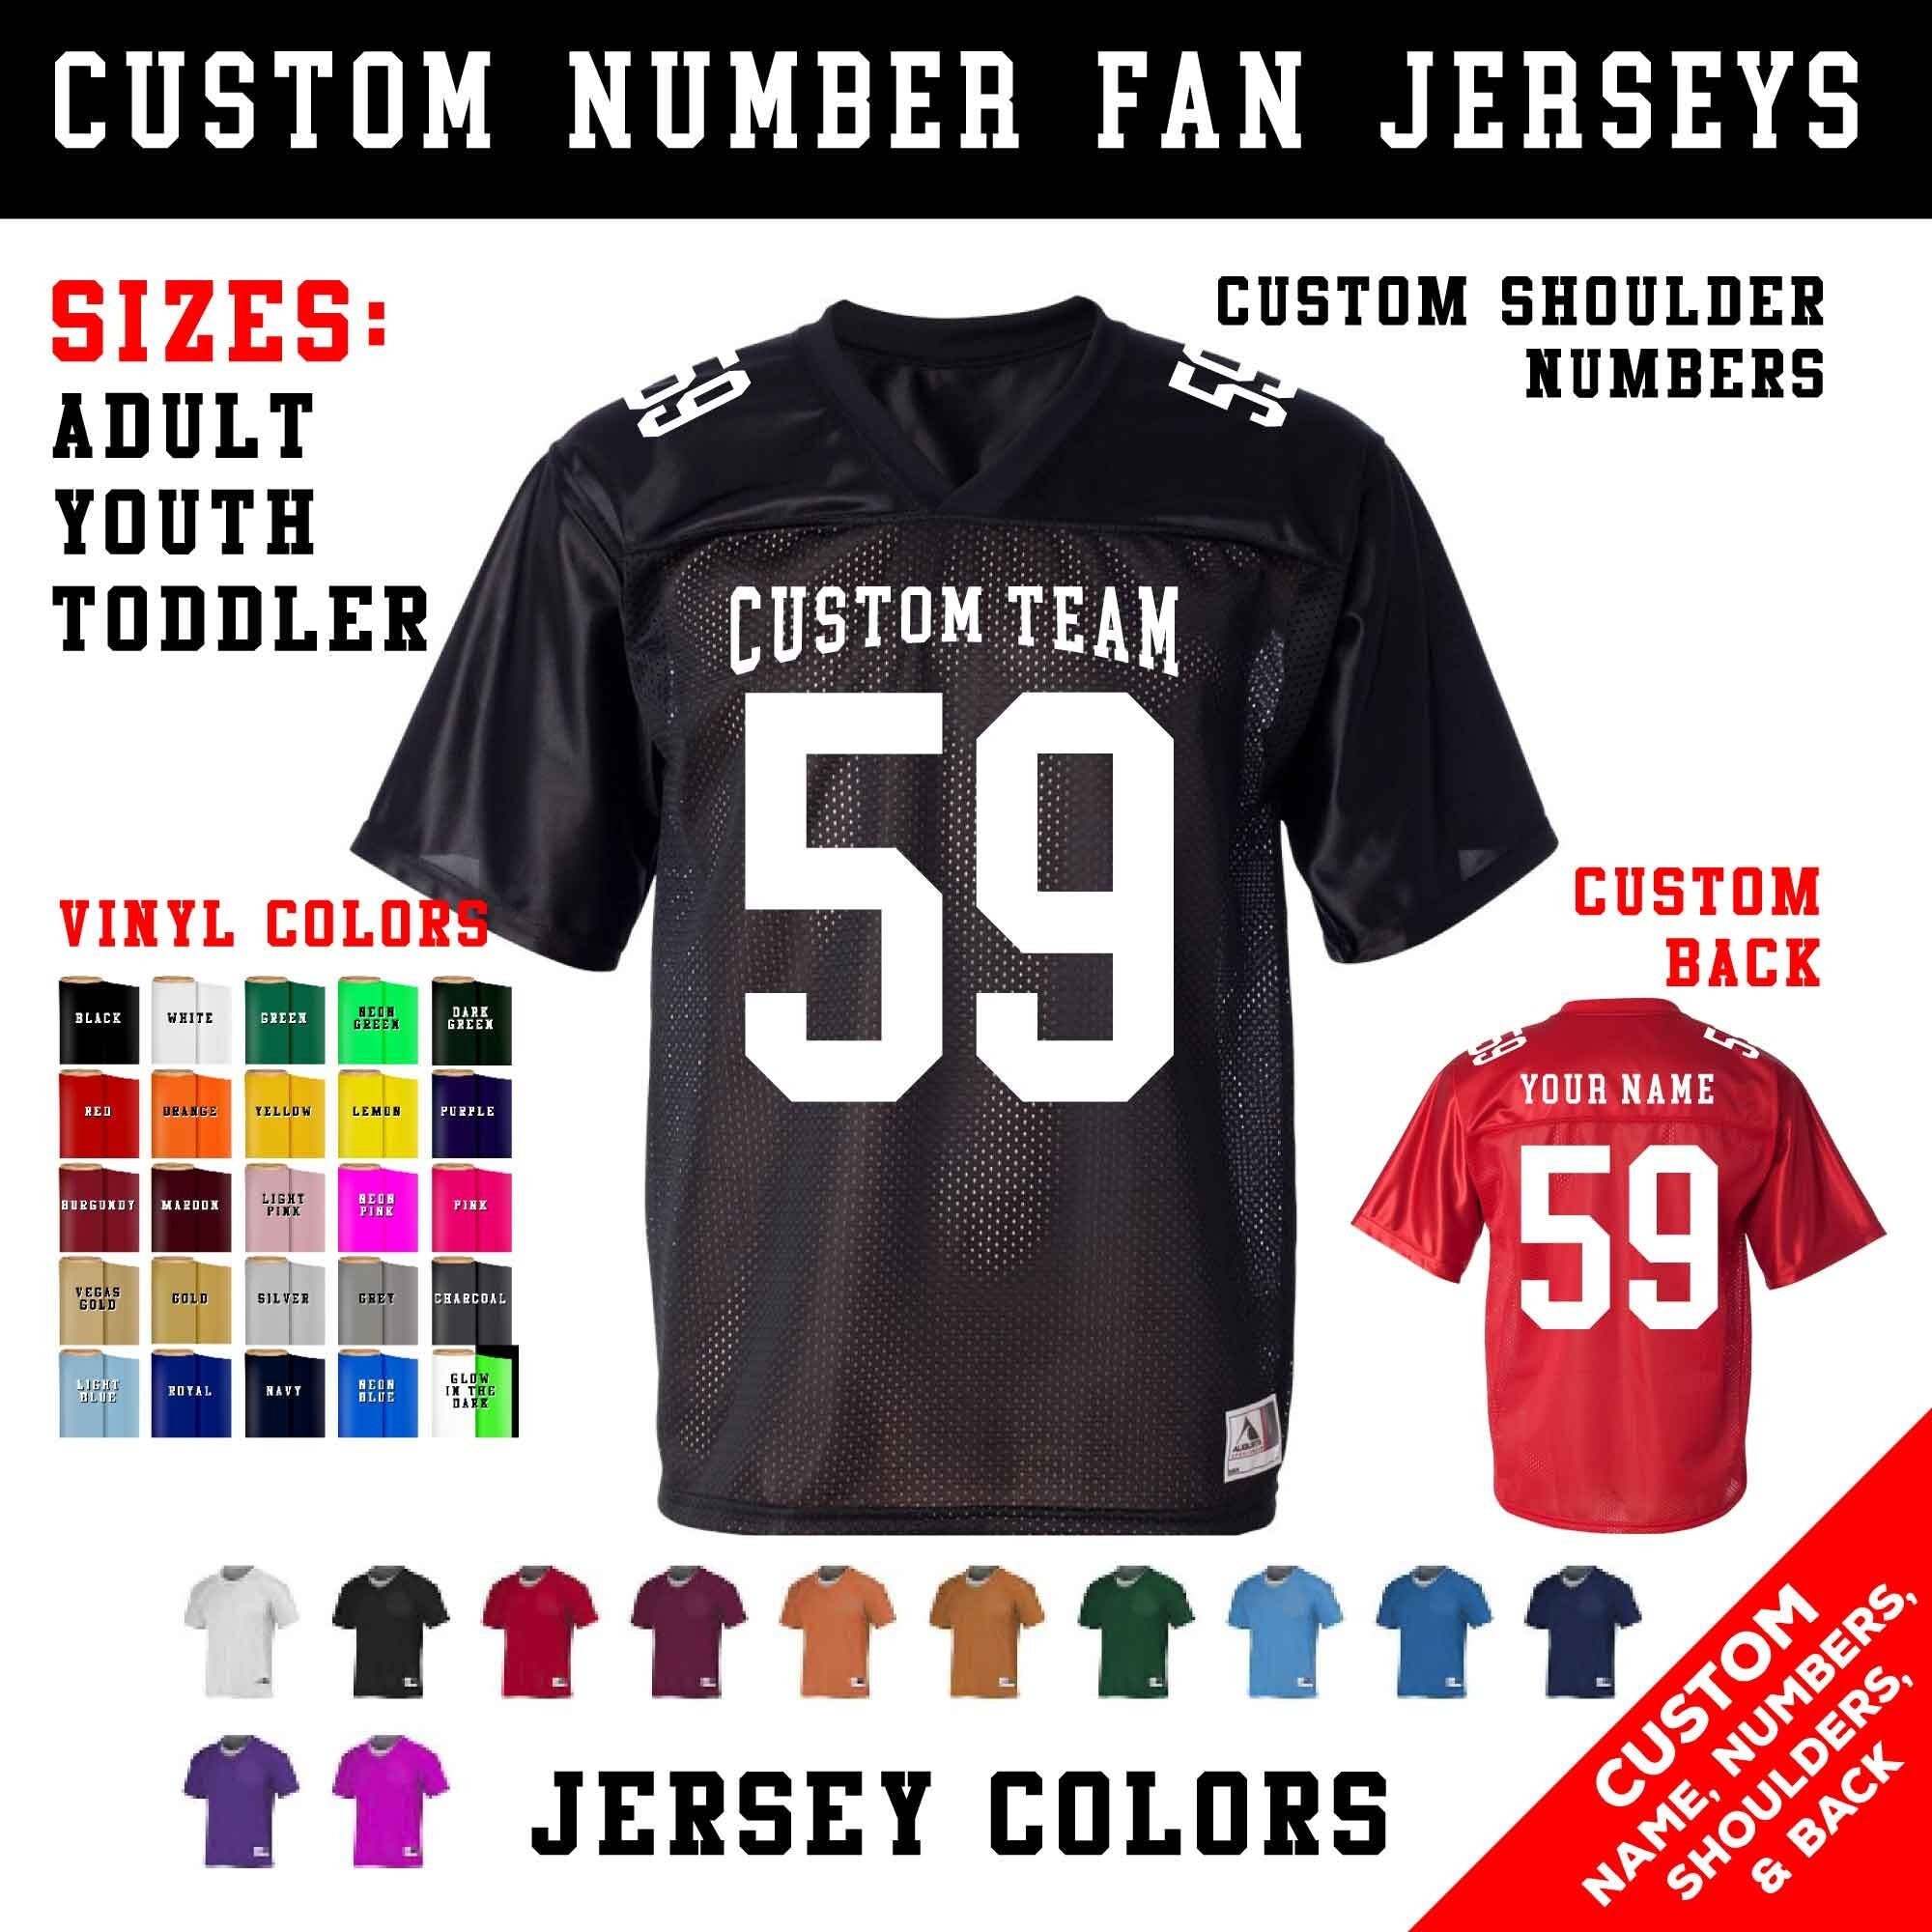 Football Jerseys on Sale For Adult & Youth